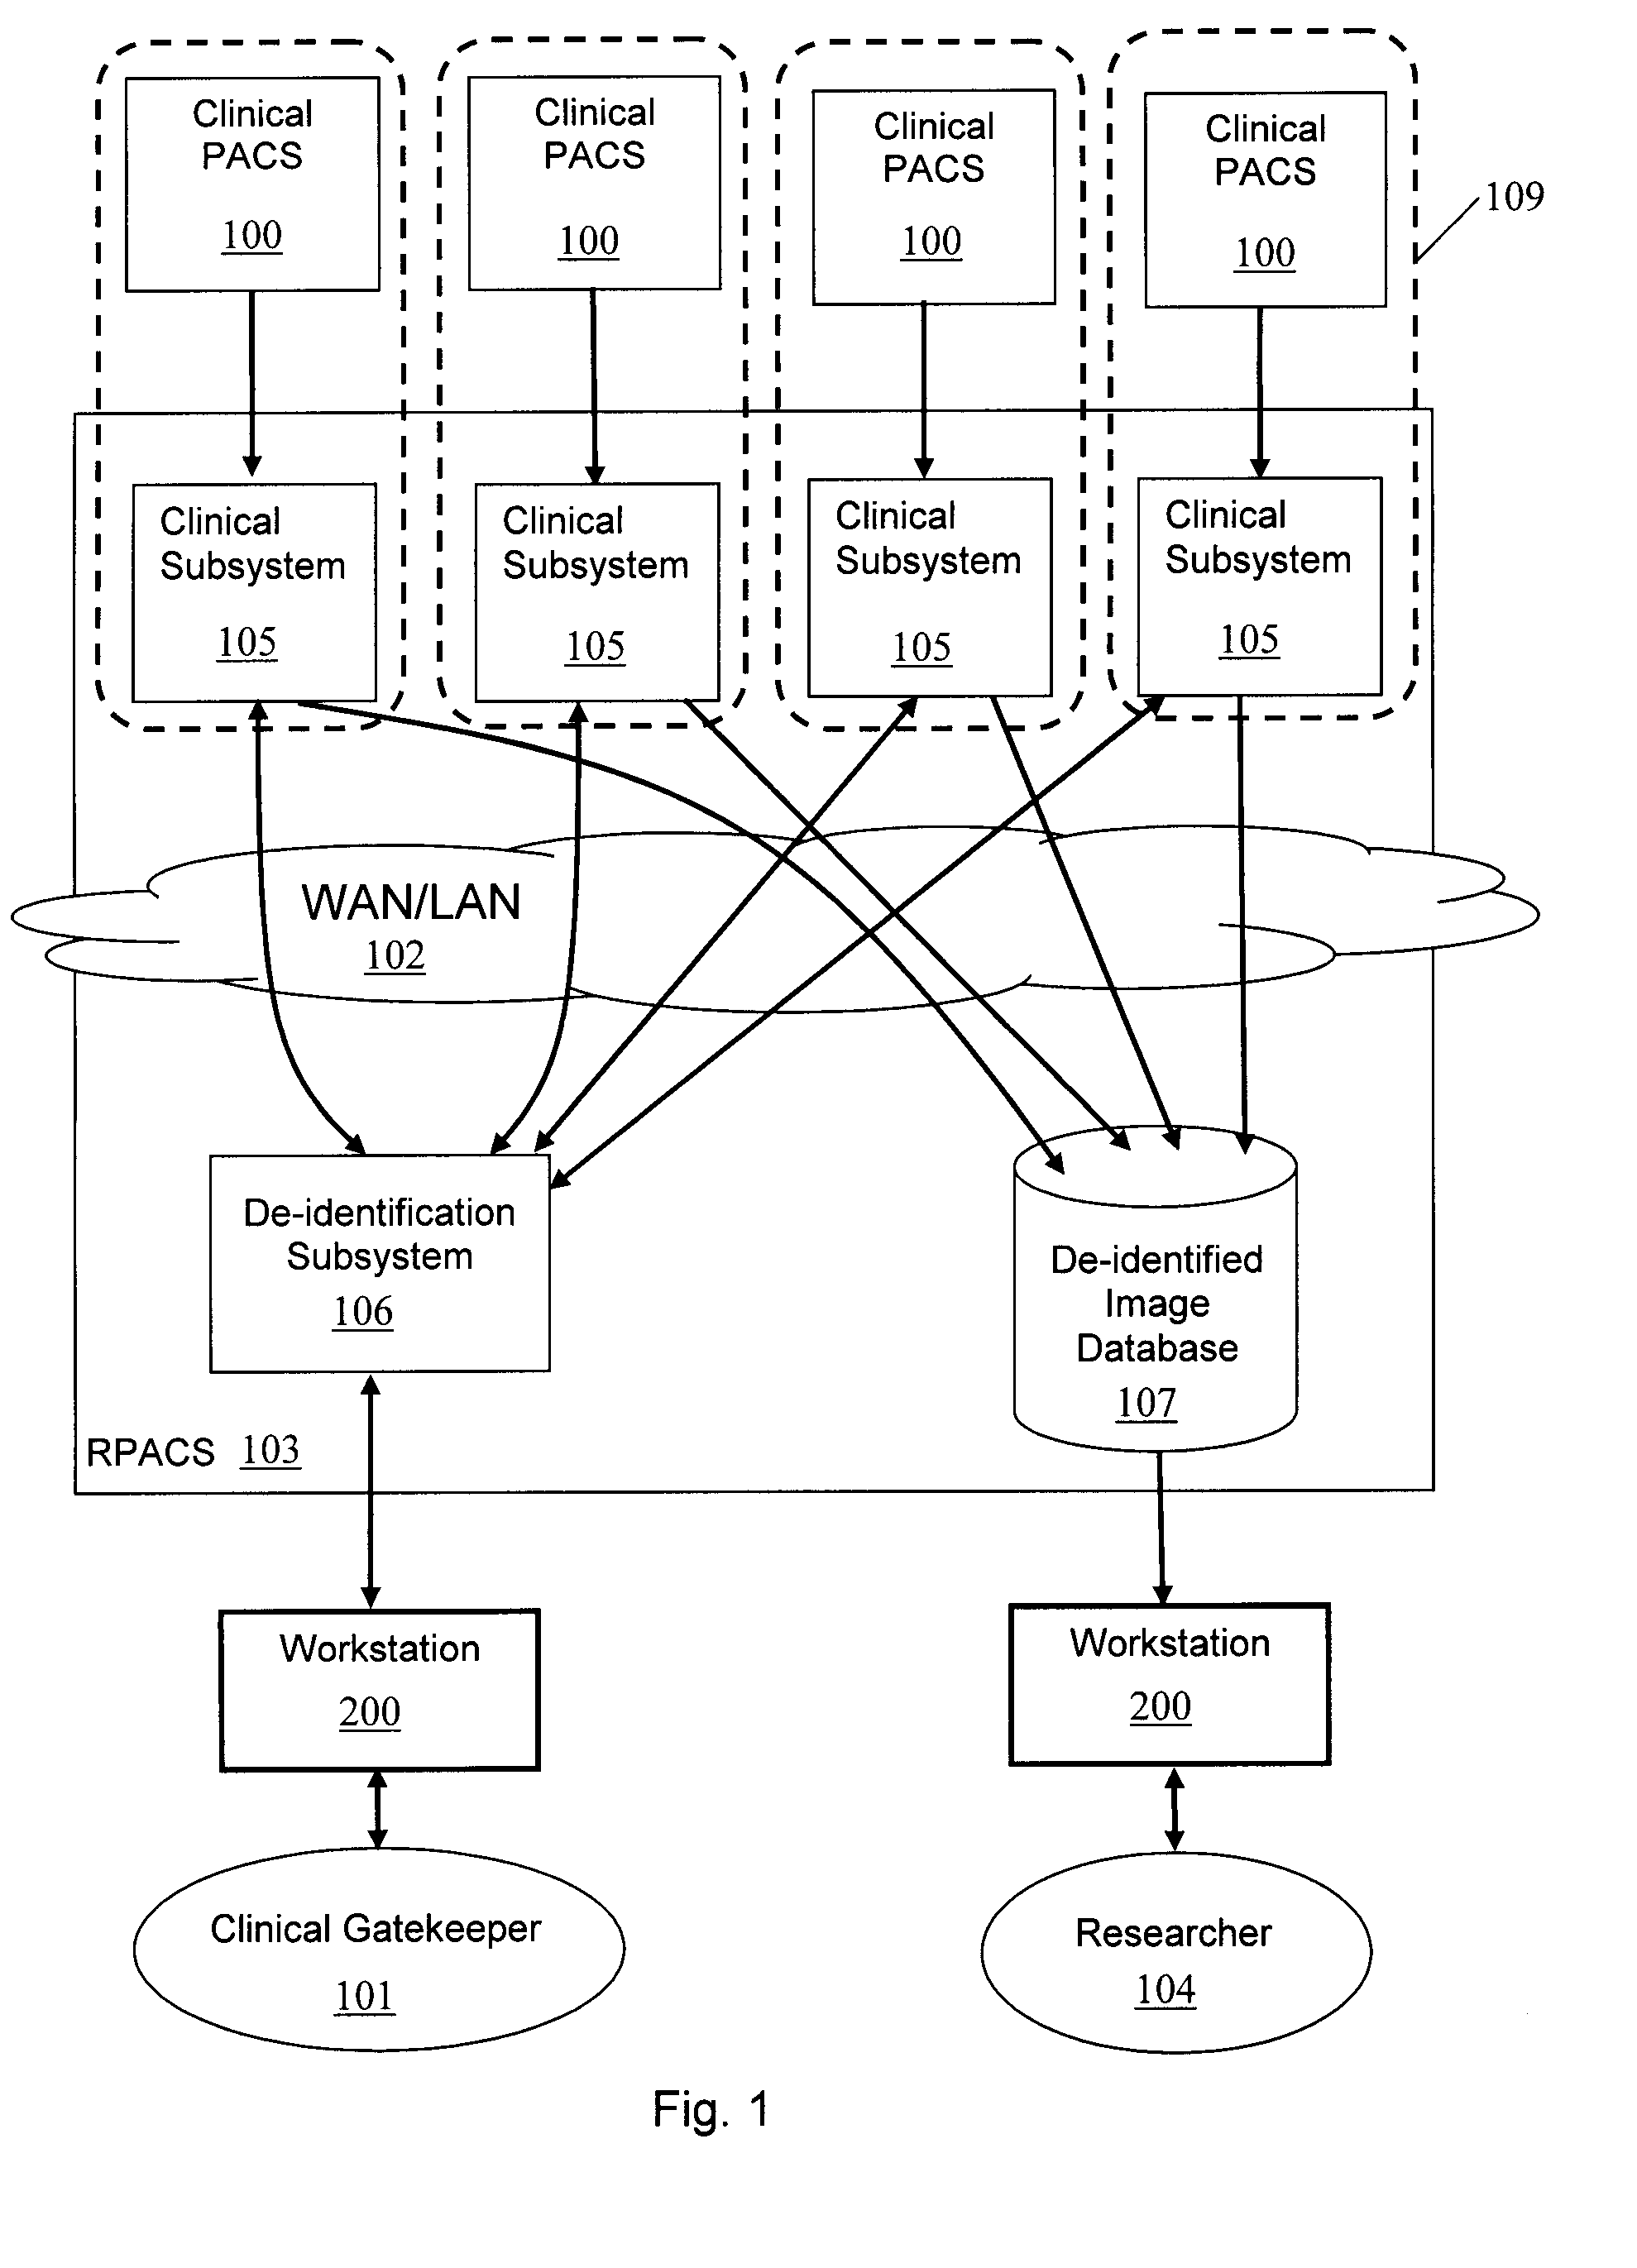 Research picture archiving communications system